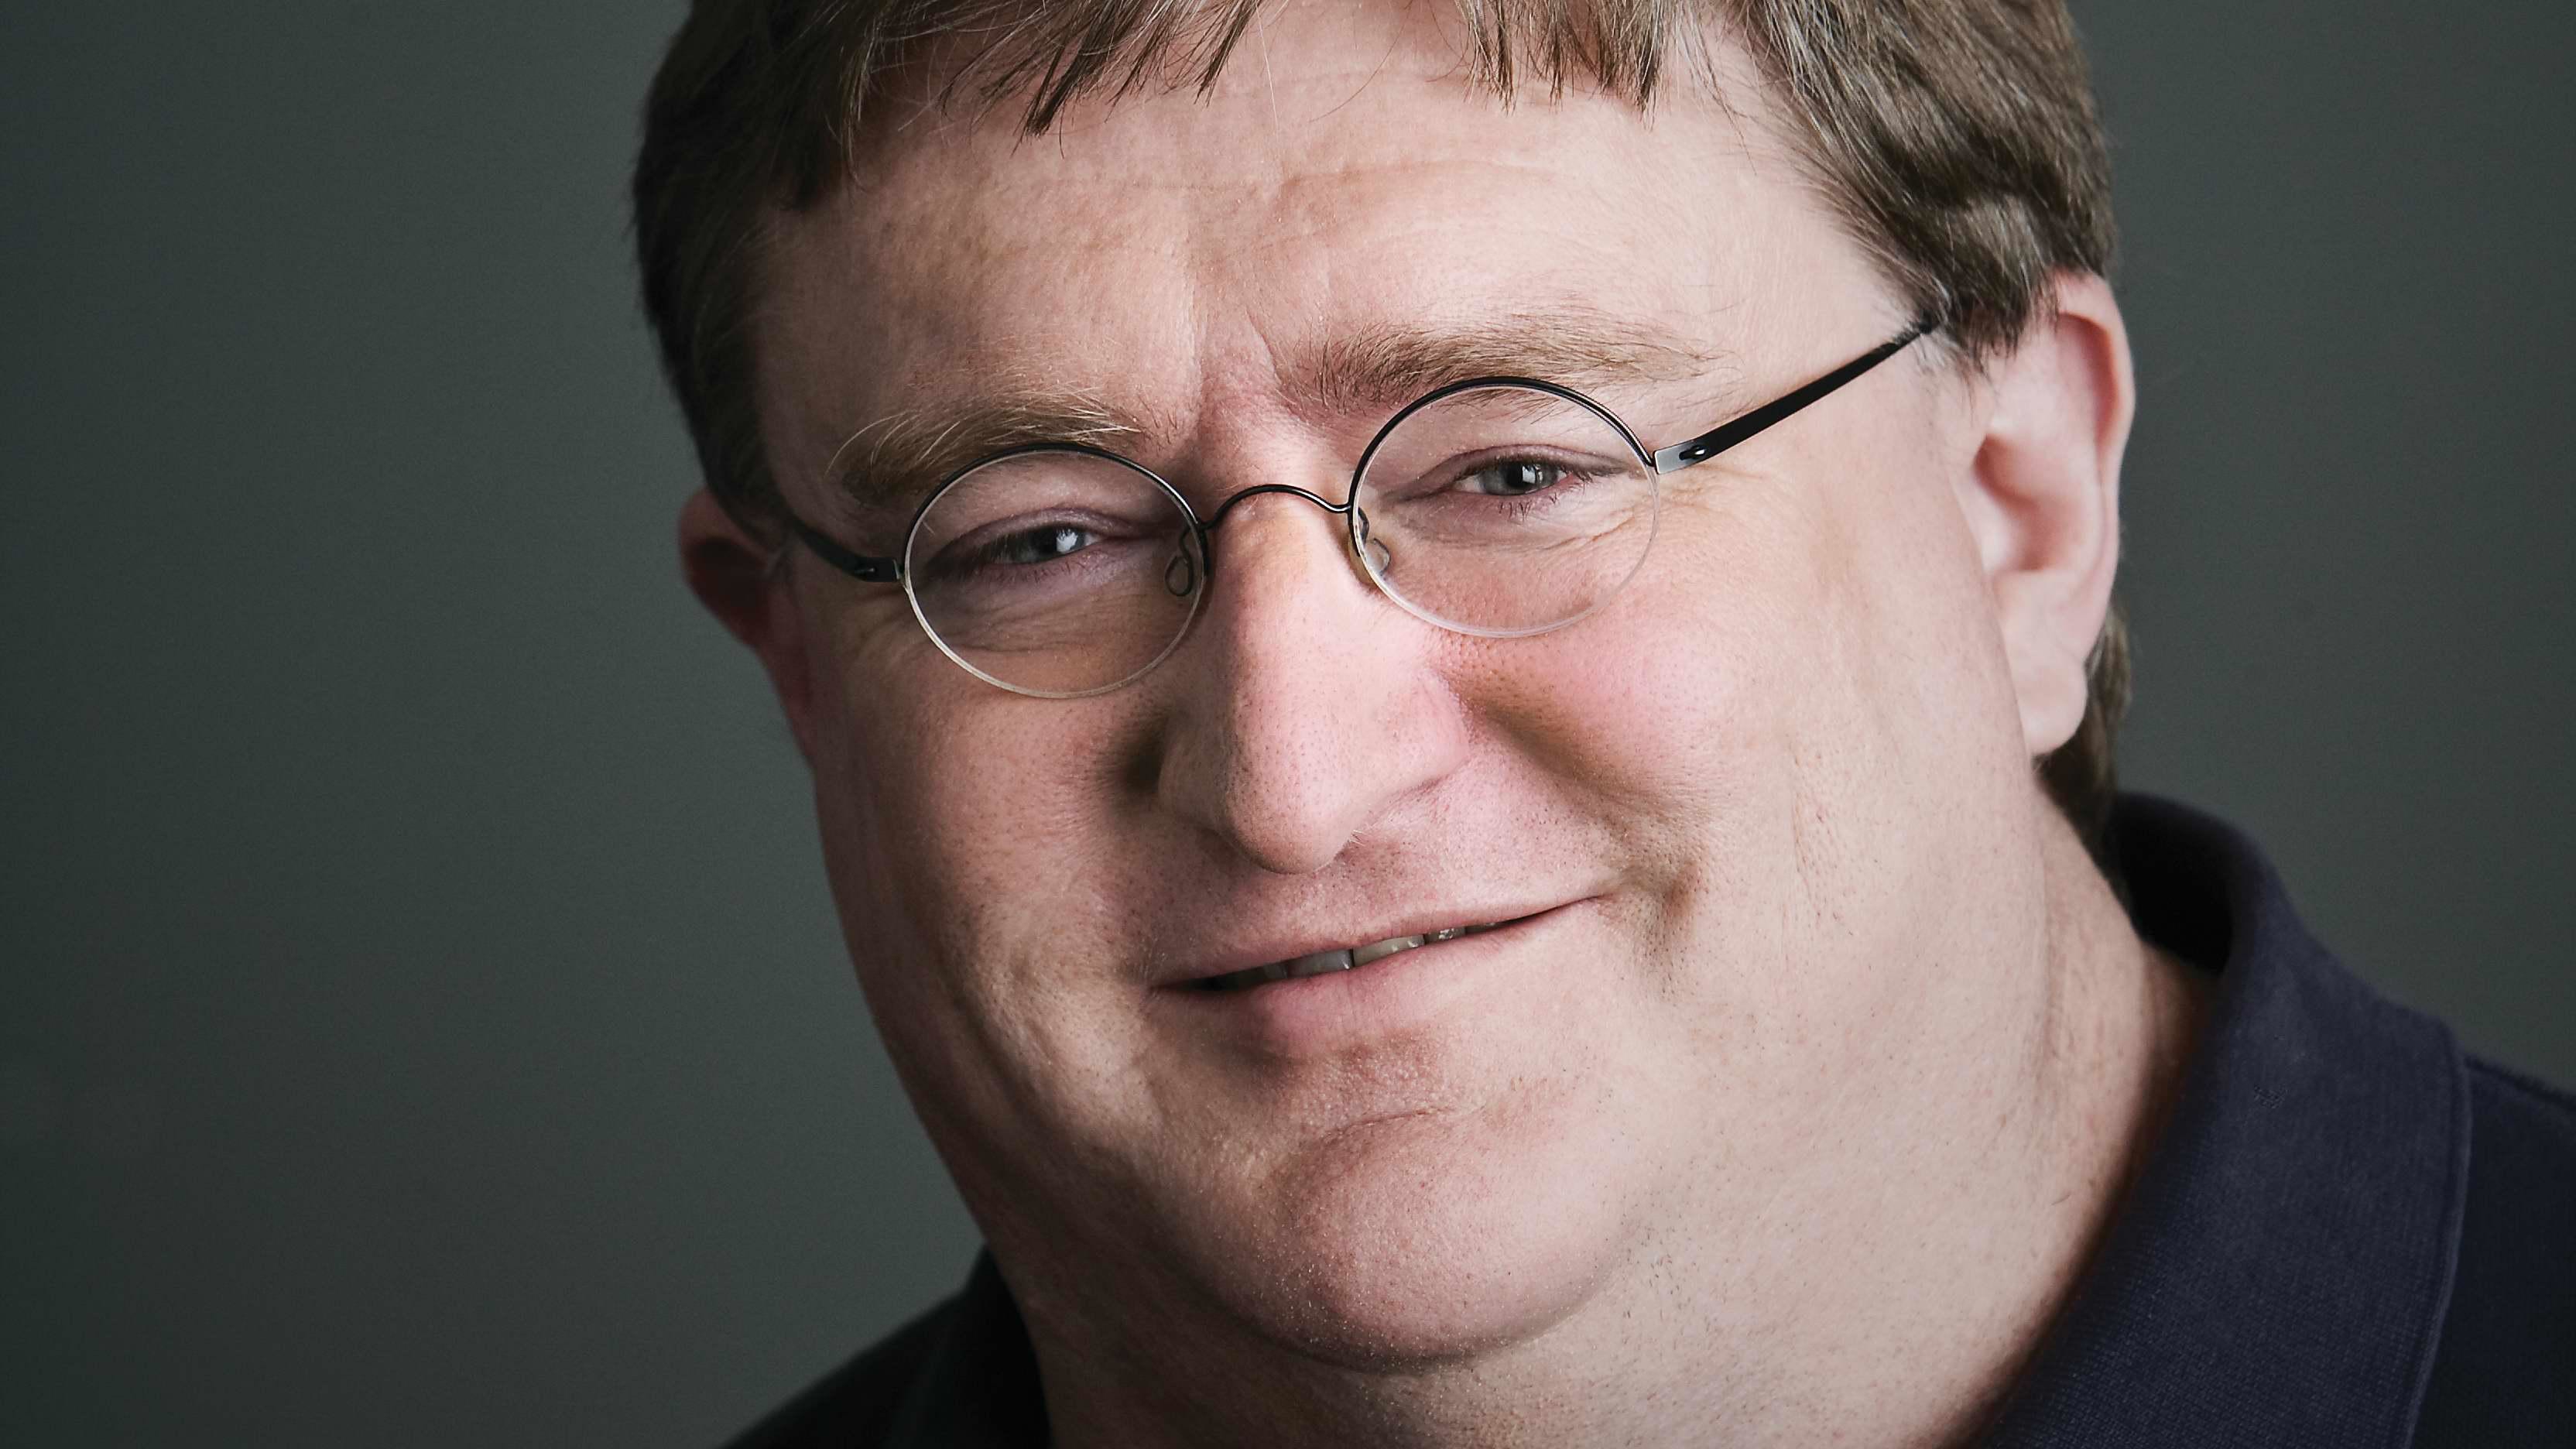 The Best Answers From The Gabe Newell and Valve Reddit Interview